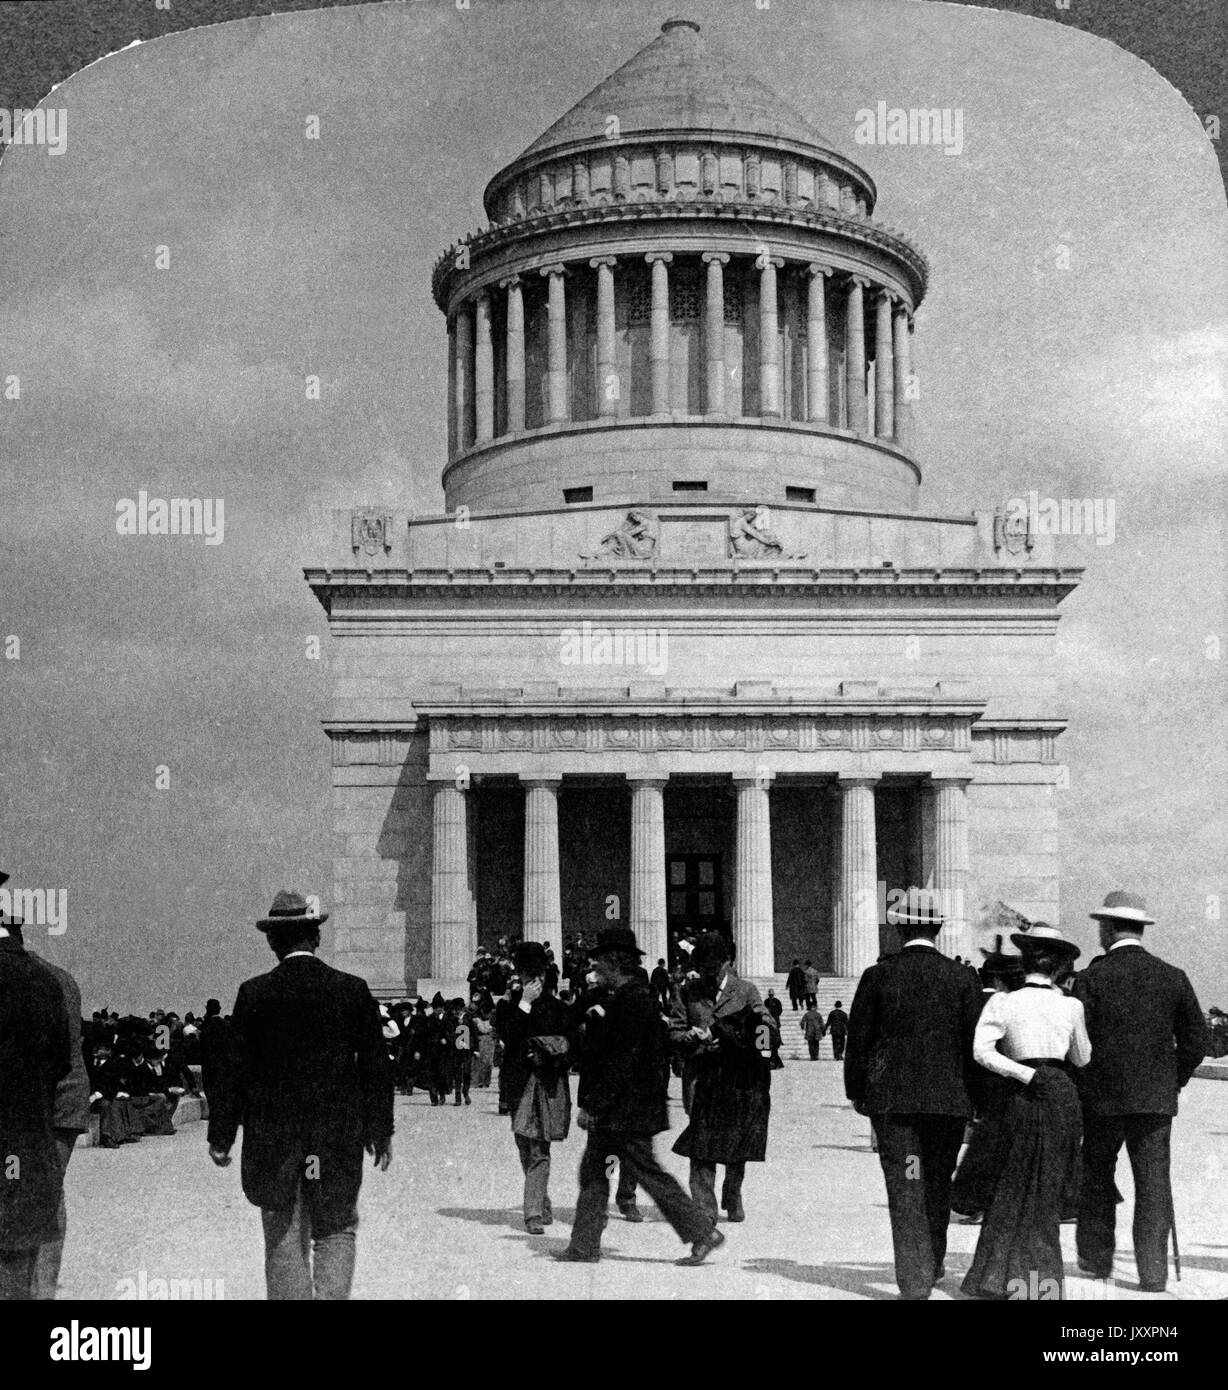 Ehrenvolle letzte Ruhestätte. das Grabmal von General Ulysses S. Grant, Riverside Park, New York, USA 1899. Honored resting place of a nation's hero: tomb of General Ulysses S. Grant, Riverside Park, New York, USA 1899. Stock Photo